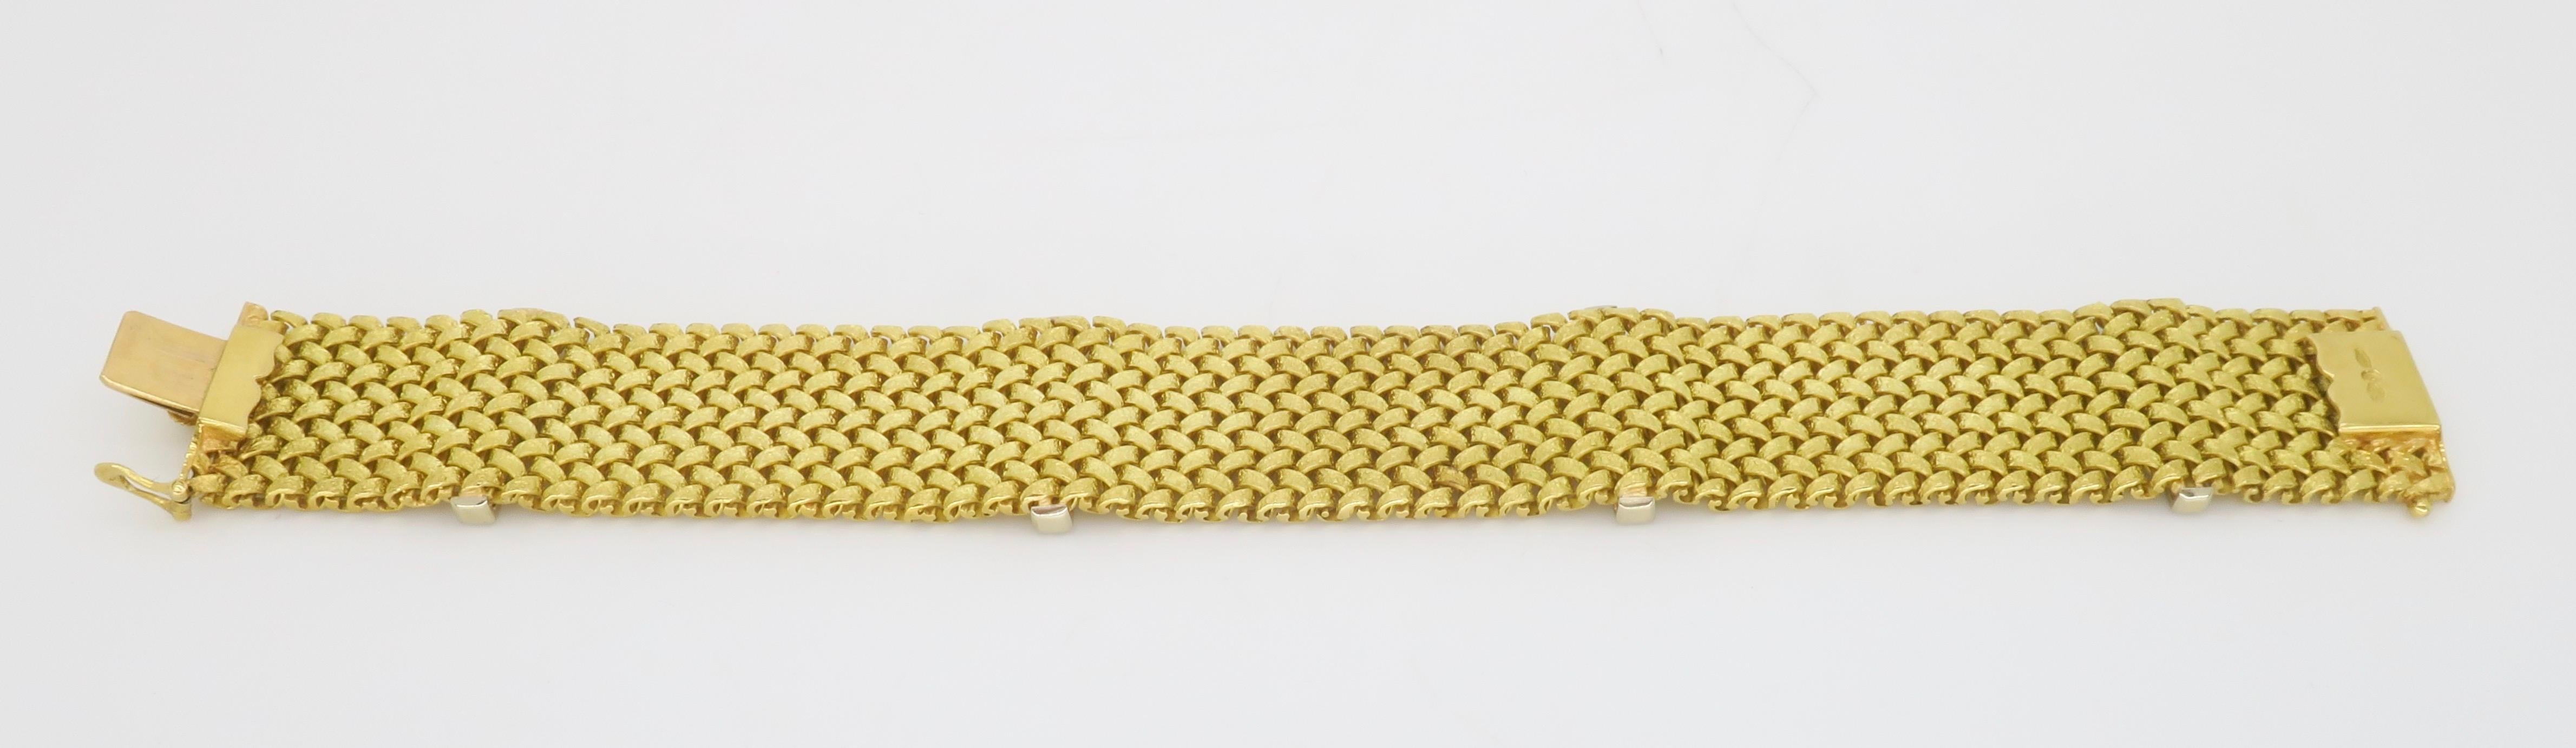 Intricate Mesh Bracelet Made in 18k Yellow Gold with Diamonds 1